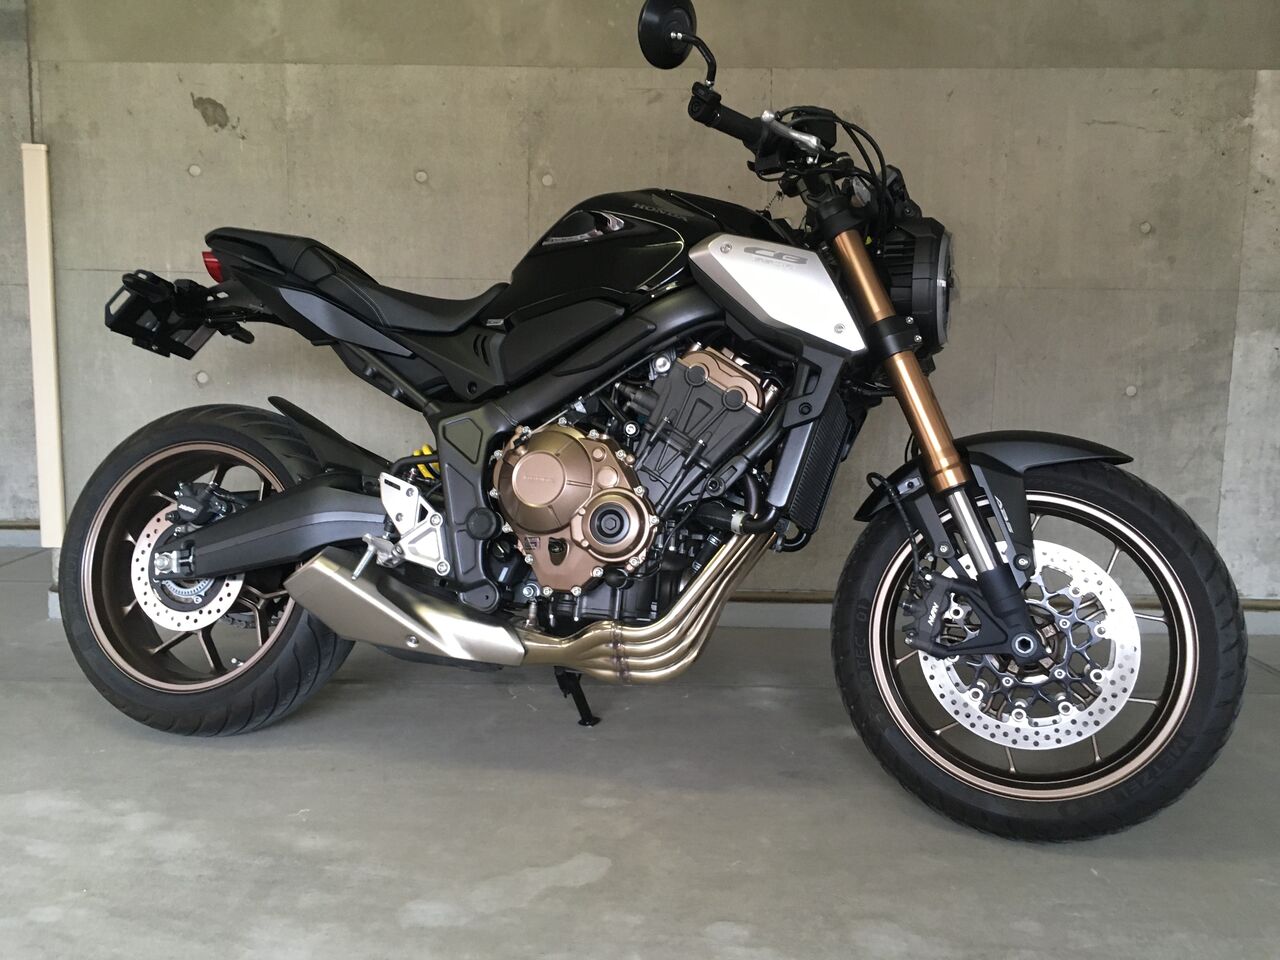 Cb650rアクティブのフェンダーレス Fun Ride バイク Blog With S1000r